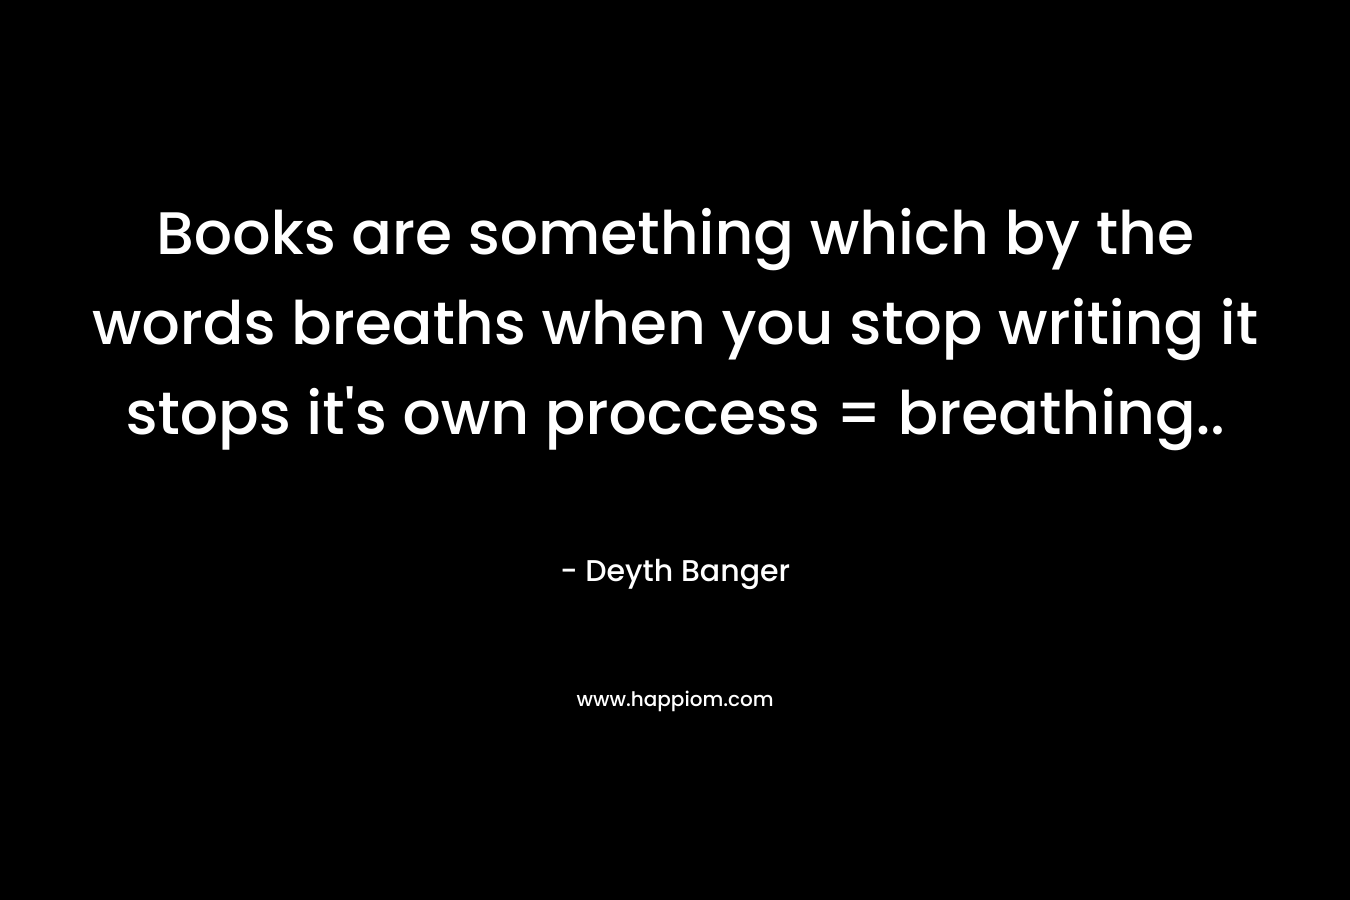 Books are something which by the words breaths when you stop writing it stops it's own proccess = breathing..